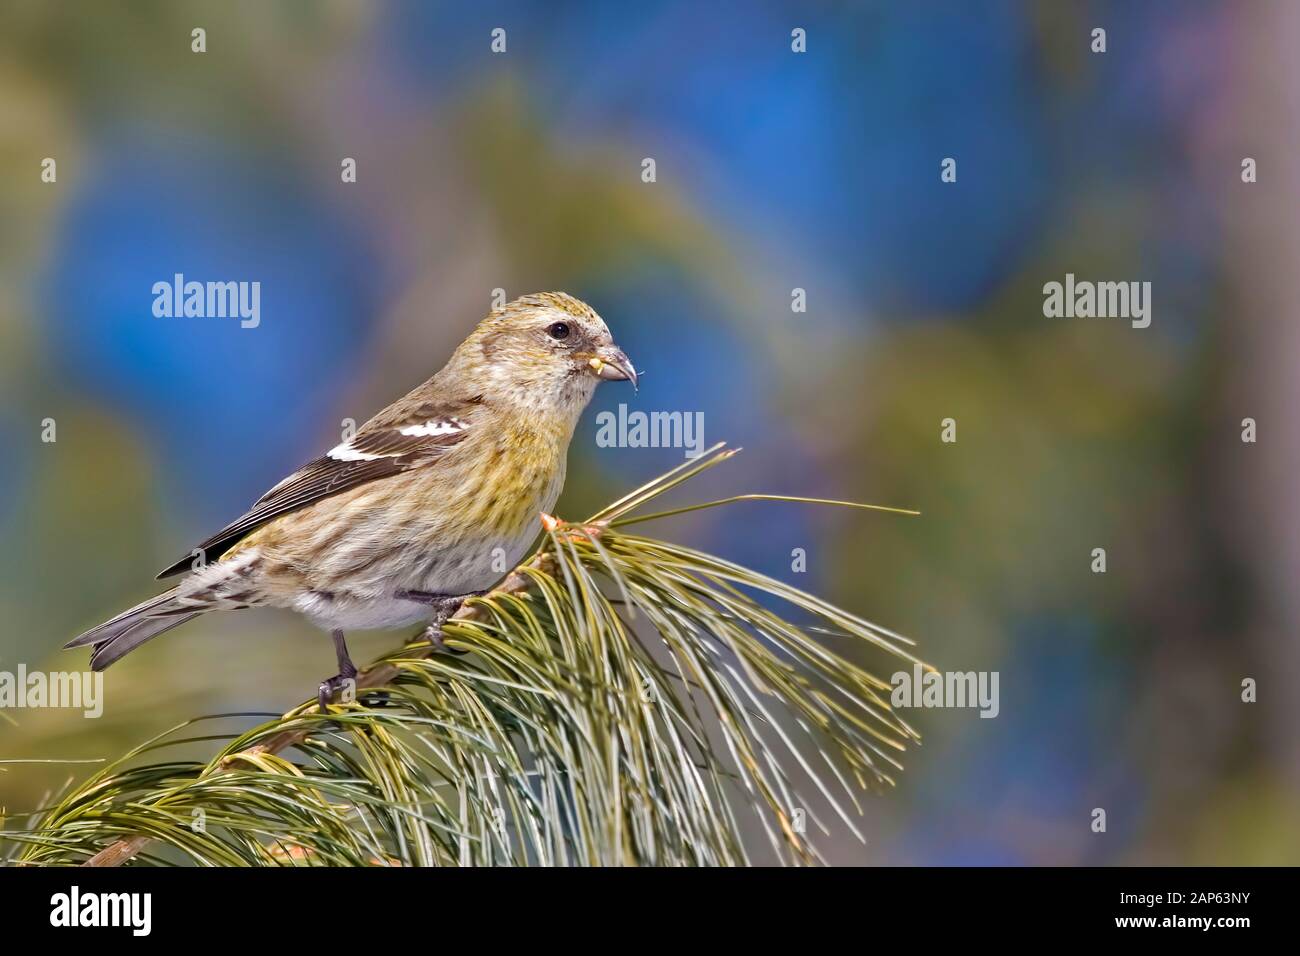 A Female White-winged Crossbill, Loxia leucoptera, perched Stock Photo